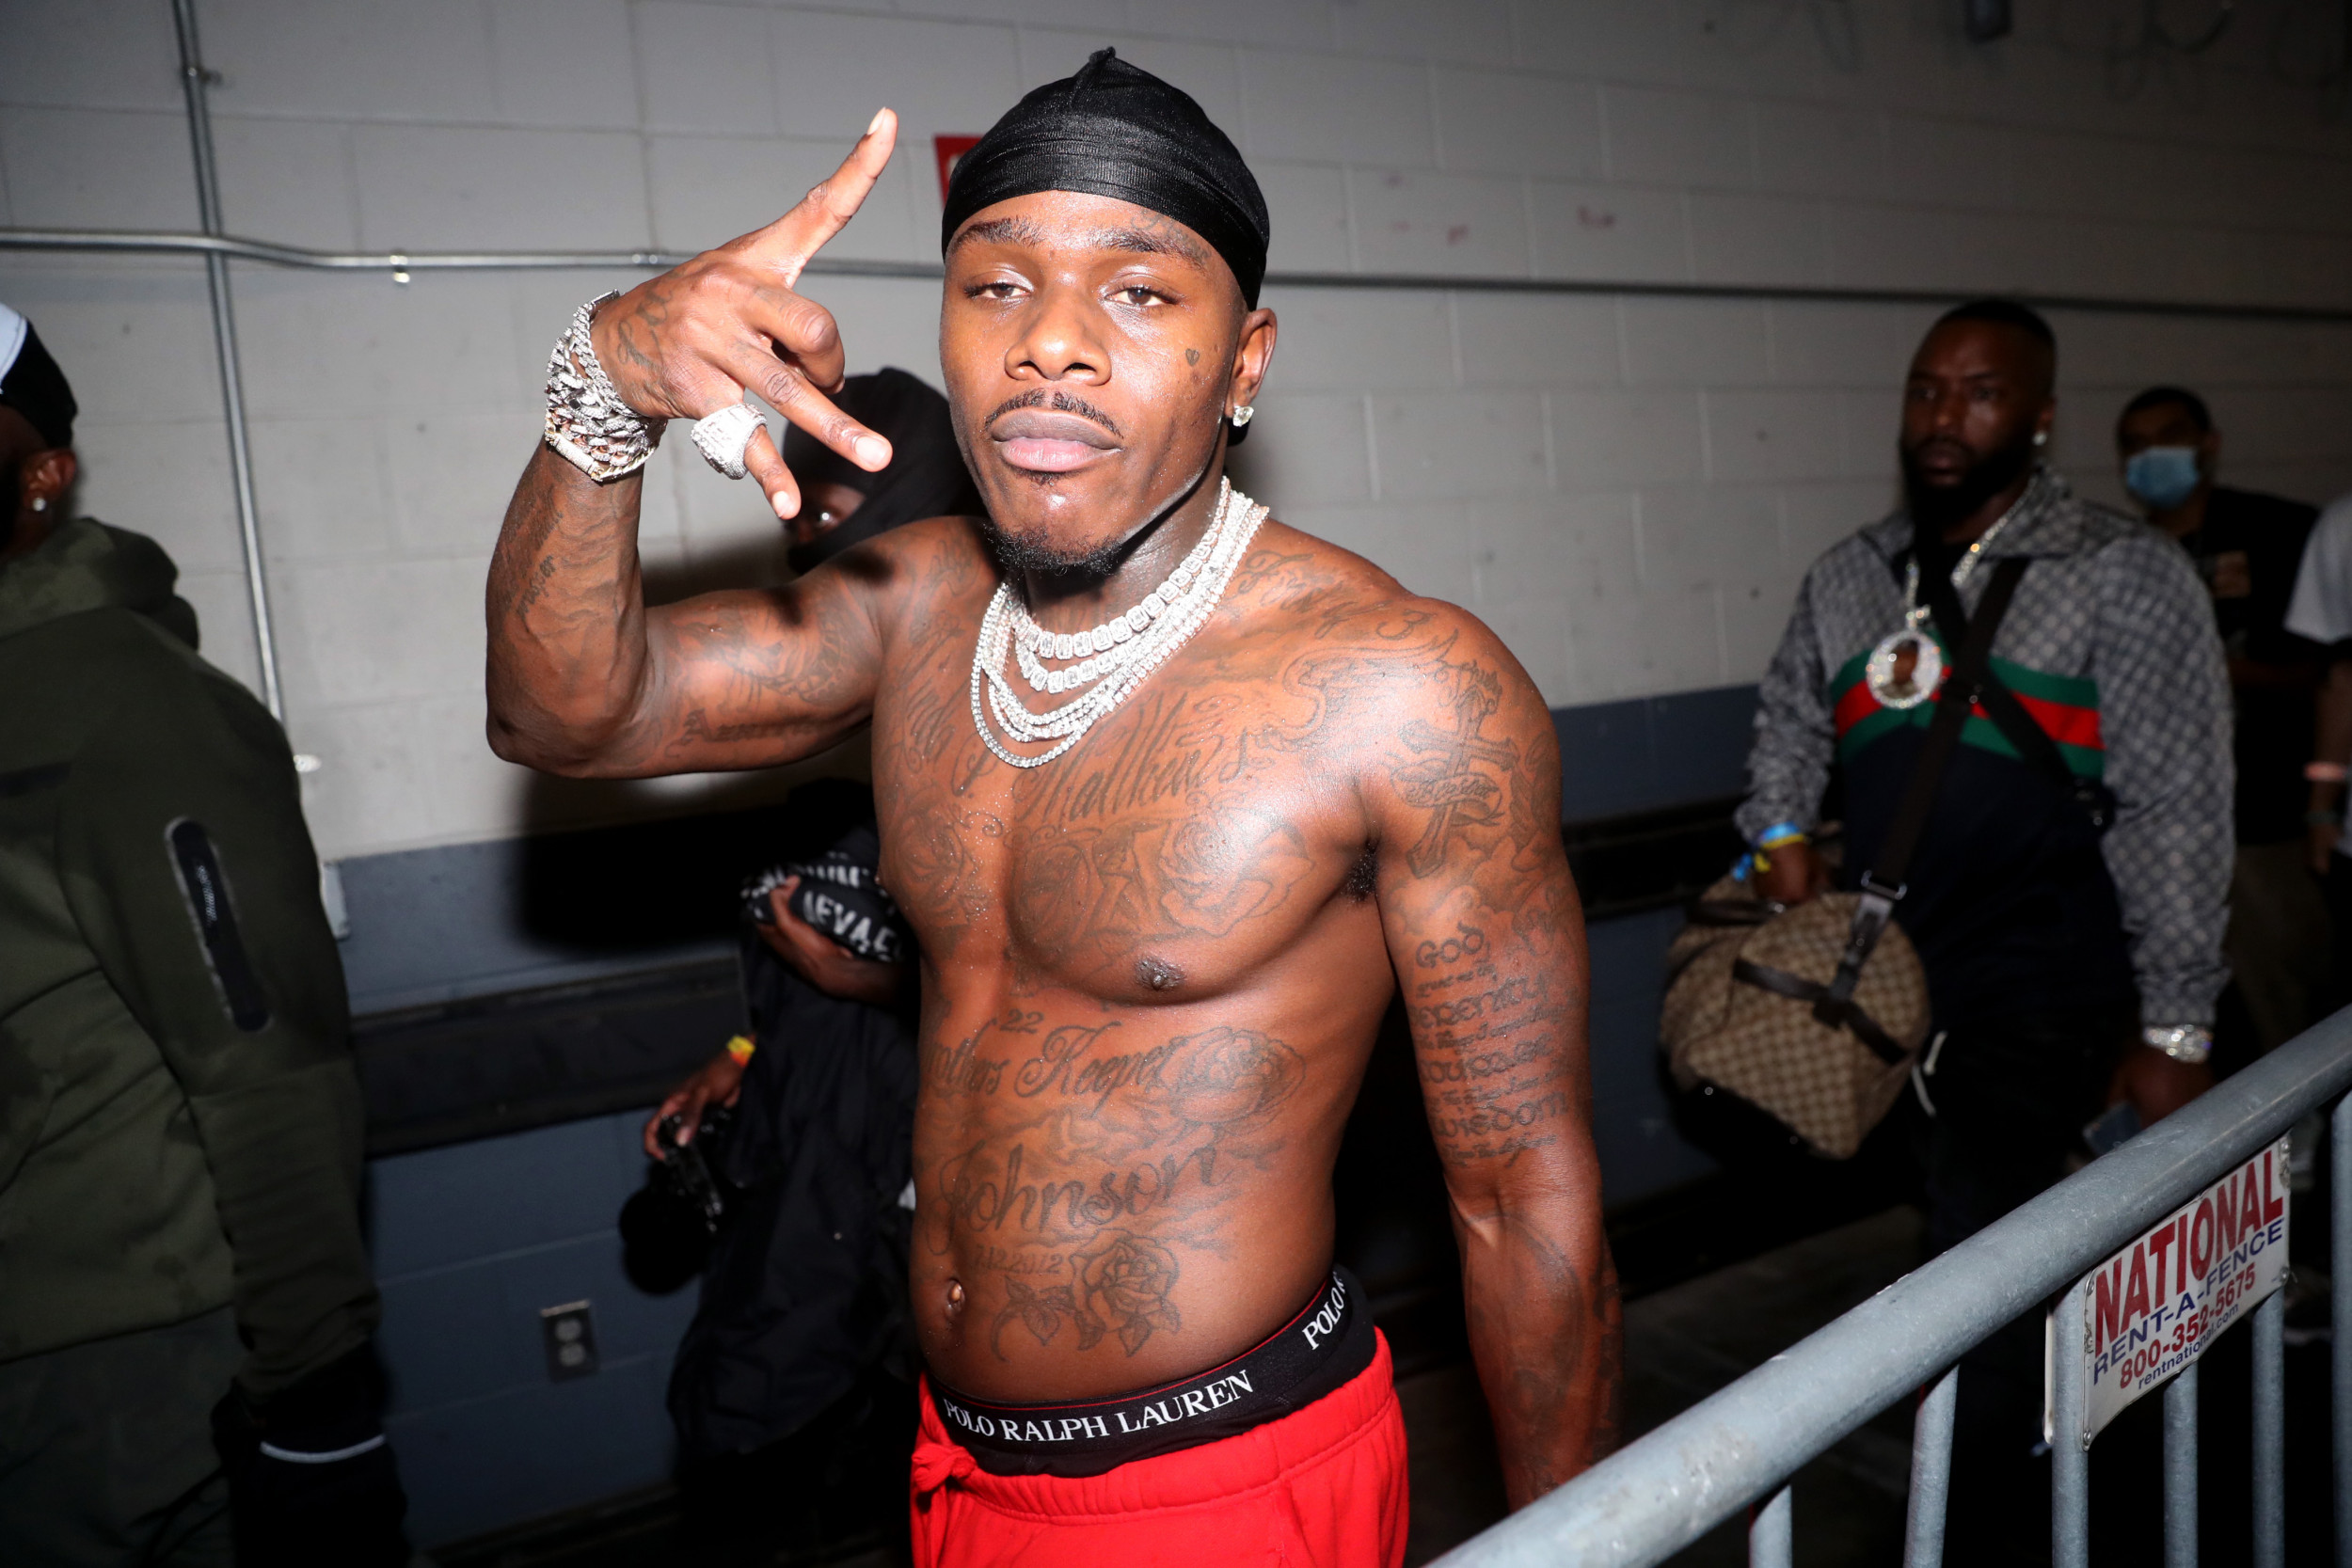 dababy will be refereed to as dadownbad (or dadownbadbaby